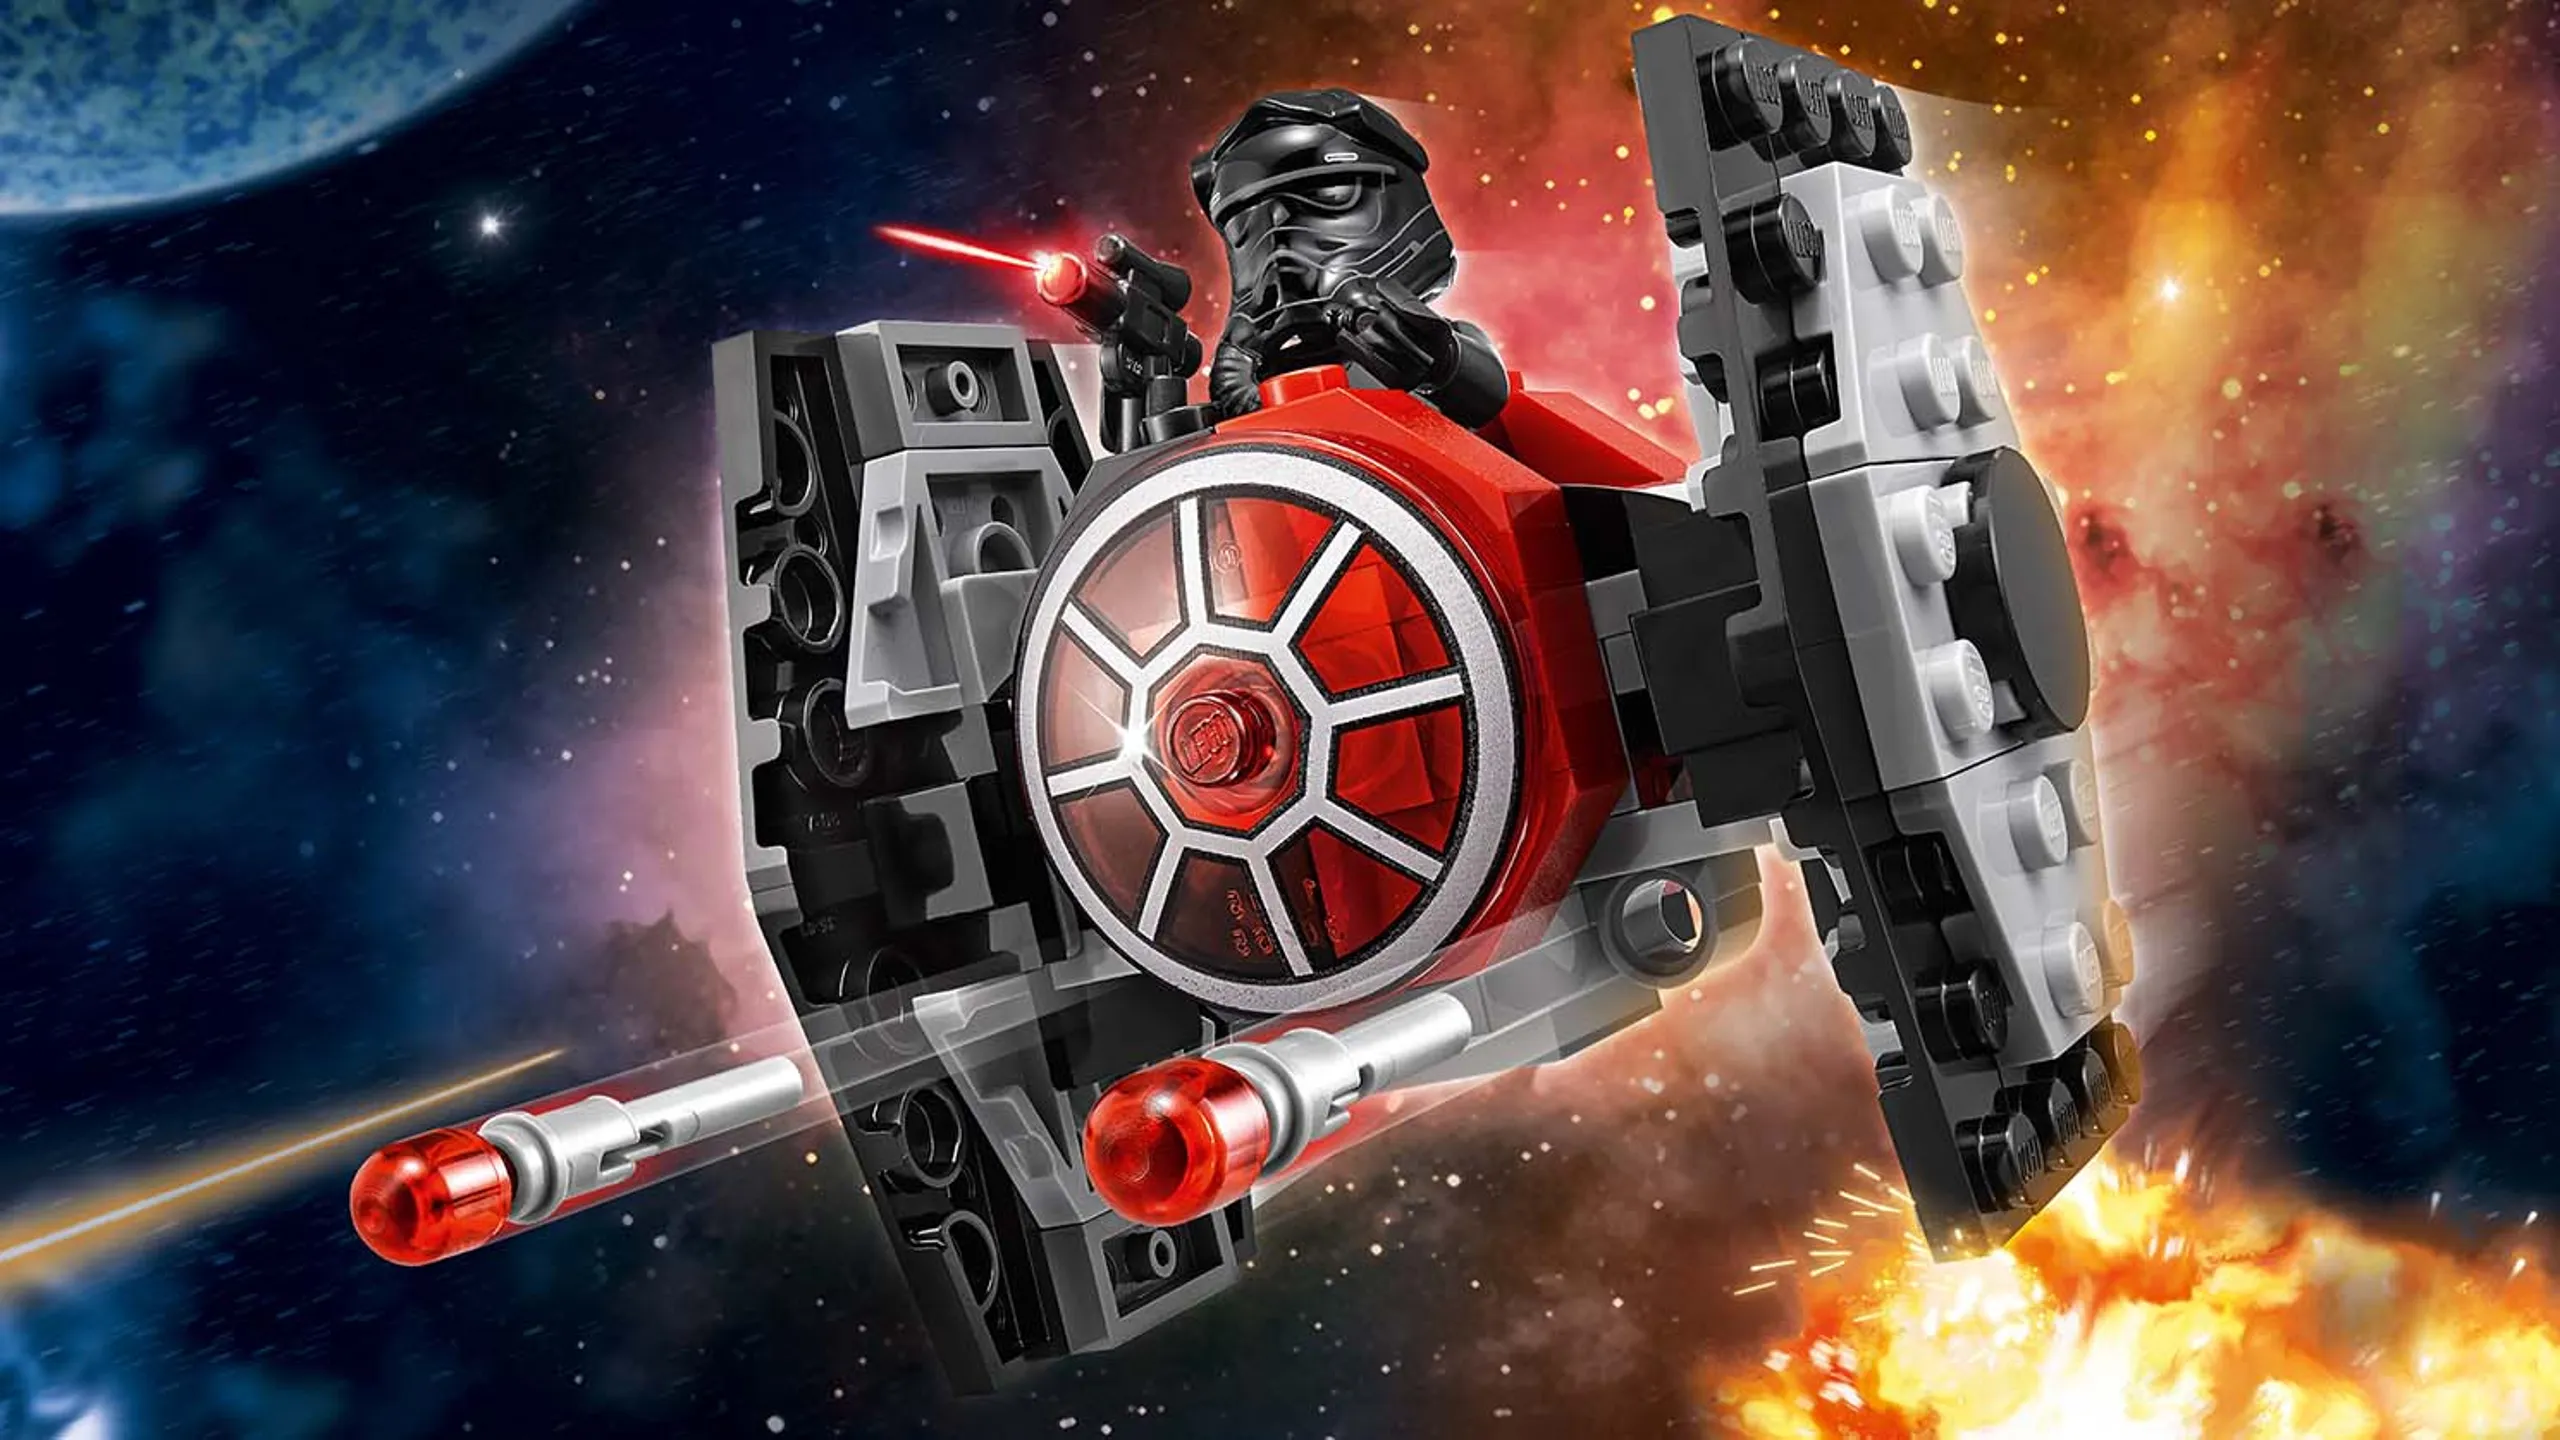 LEGO Star Wars First Order TIE Fighter™ Microfighter - 75194 - Seat the pilot on top, load the flick missiles and speed into battle!